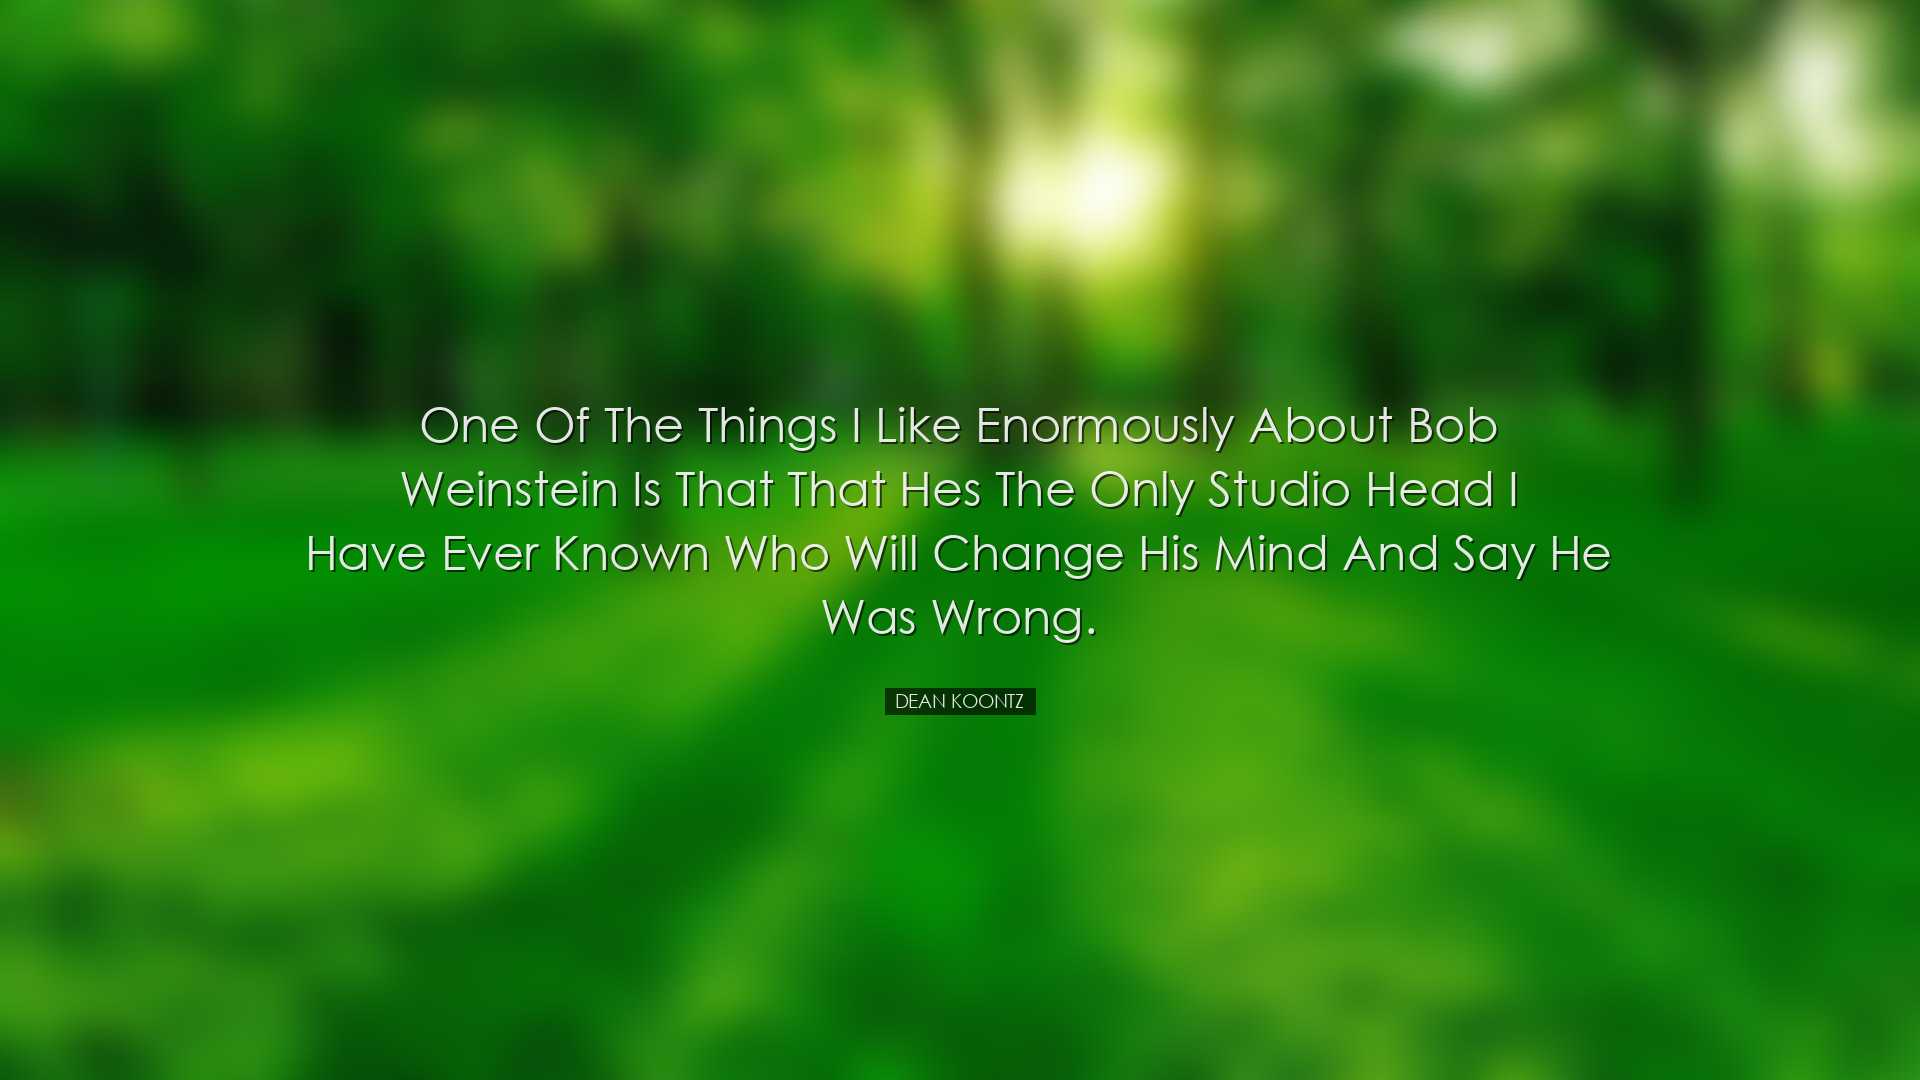 One of the things I like enormously about Bob Weinstein is that th